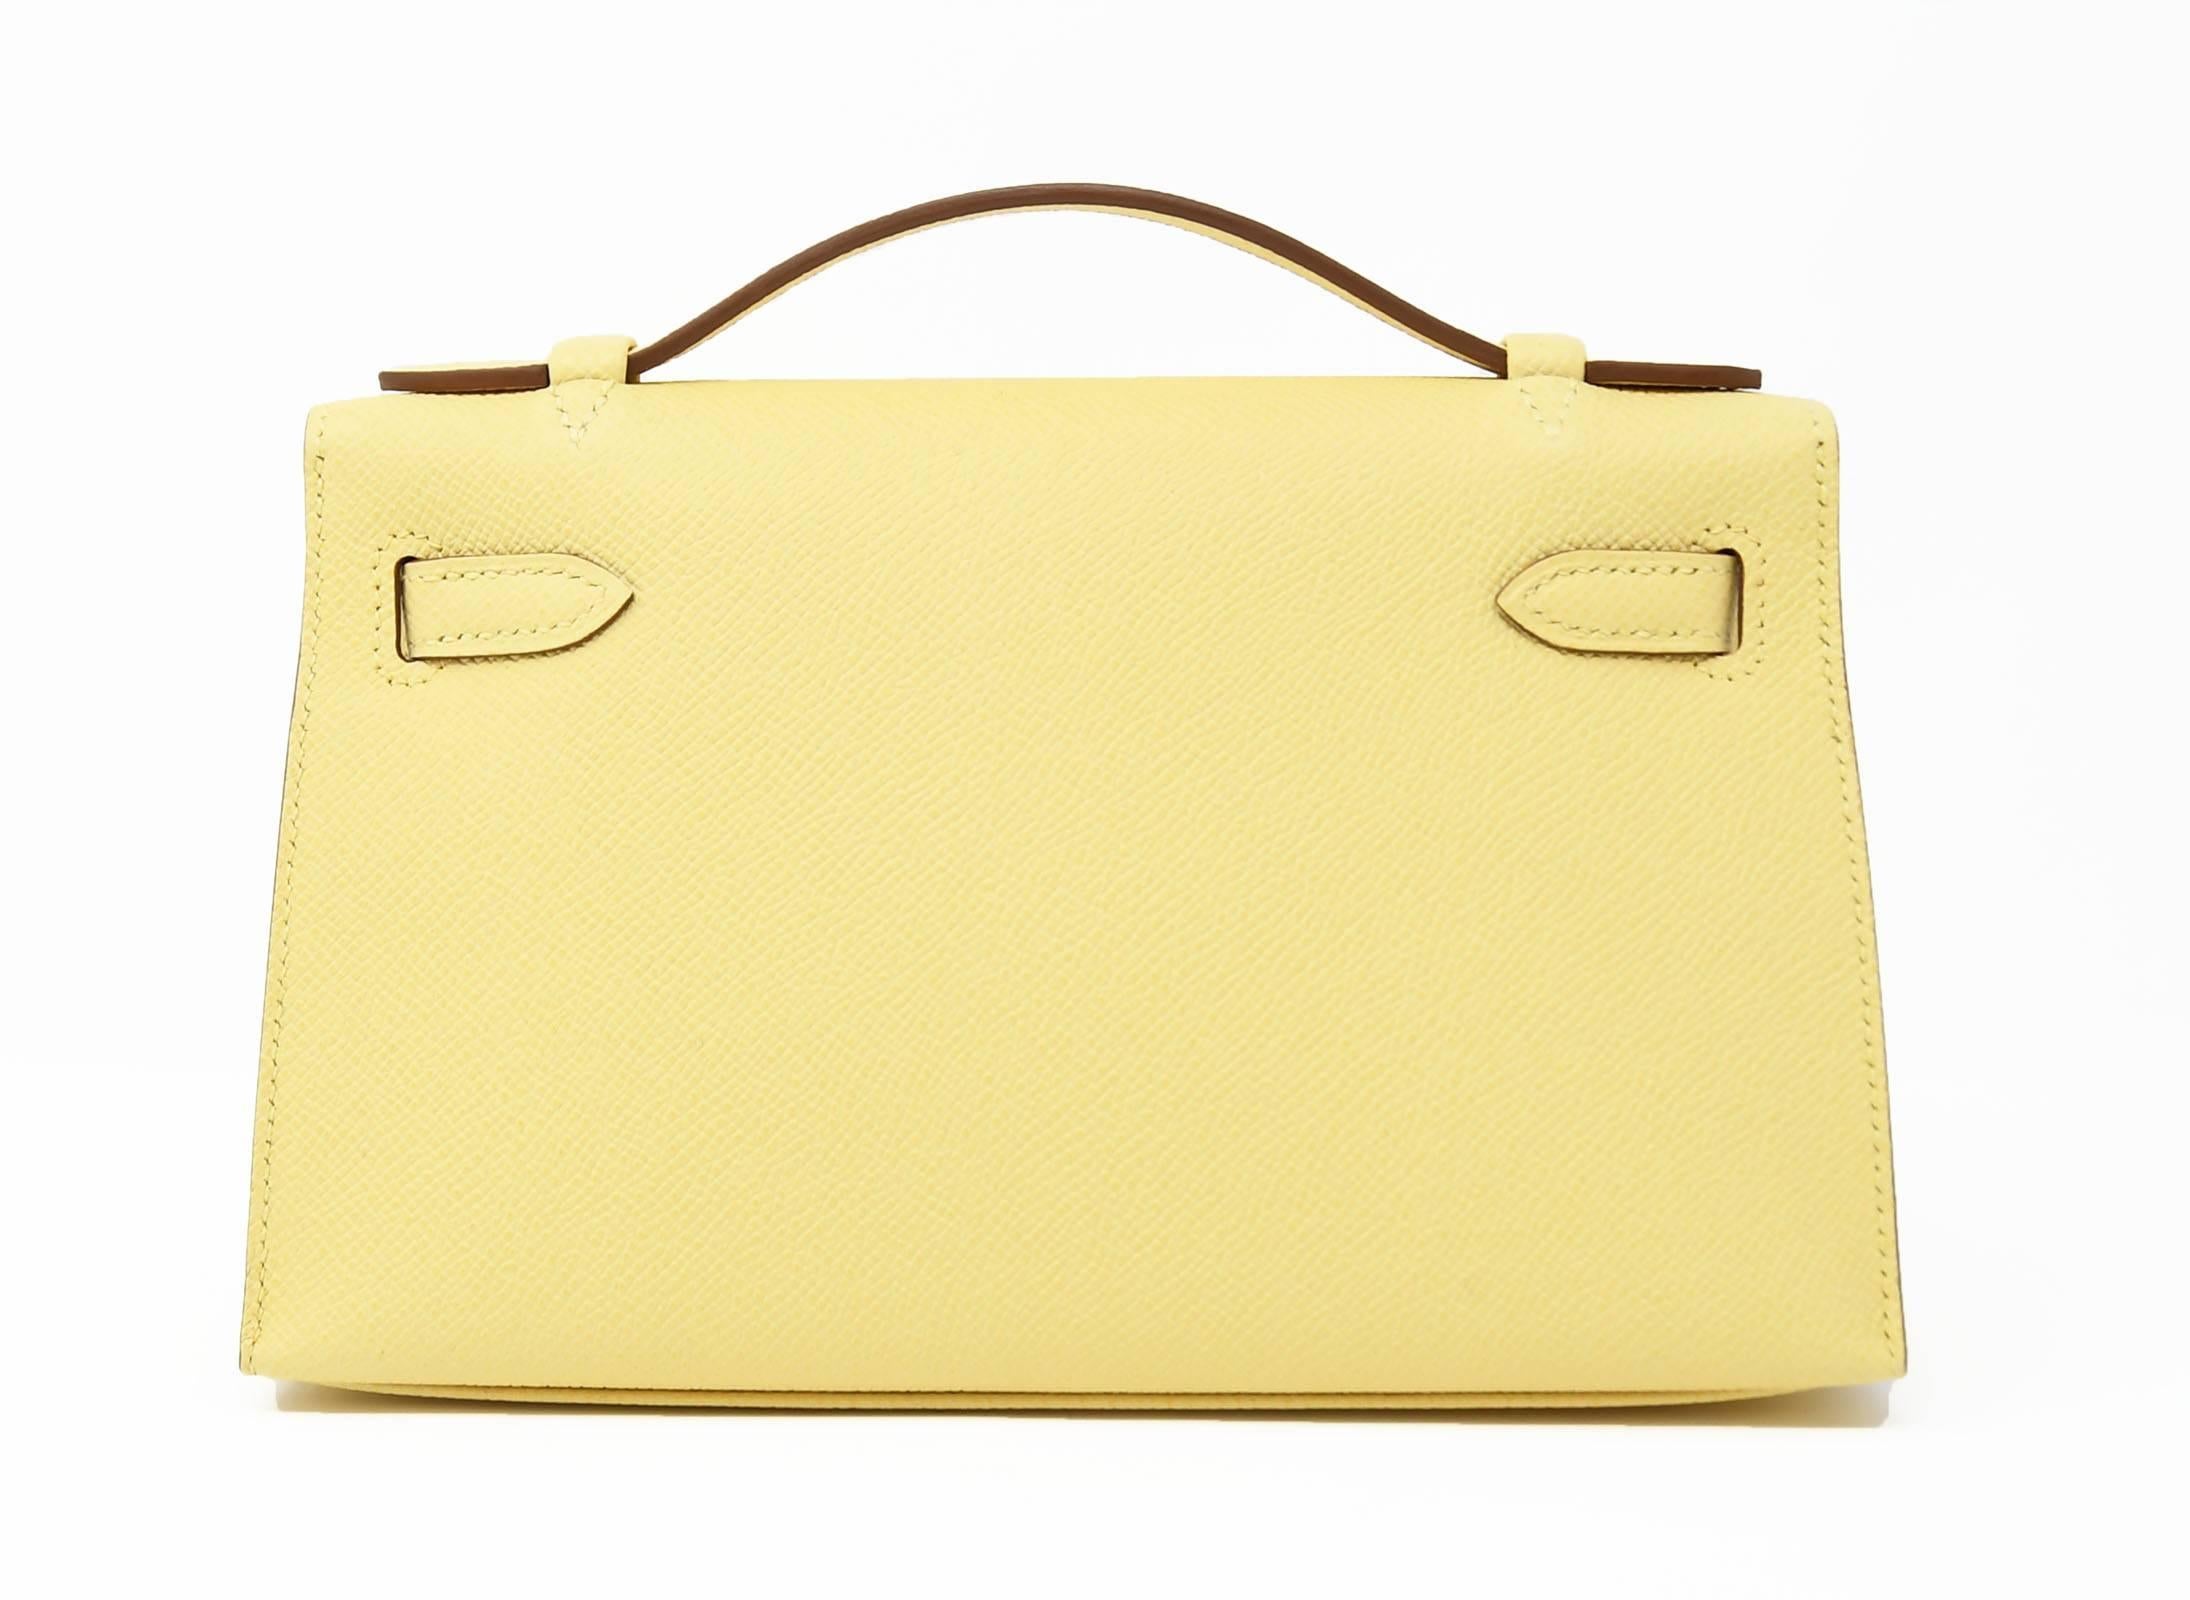 This light yellow kelly pochette is a perfect addition to any summer wardrobe.  A brand new item, with plastic on the hardware, also comes with the dustbag and box.  Looks great with an elegant outfit or dressed down with denim.